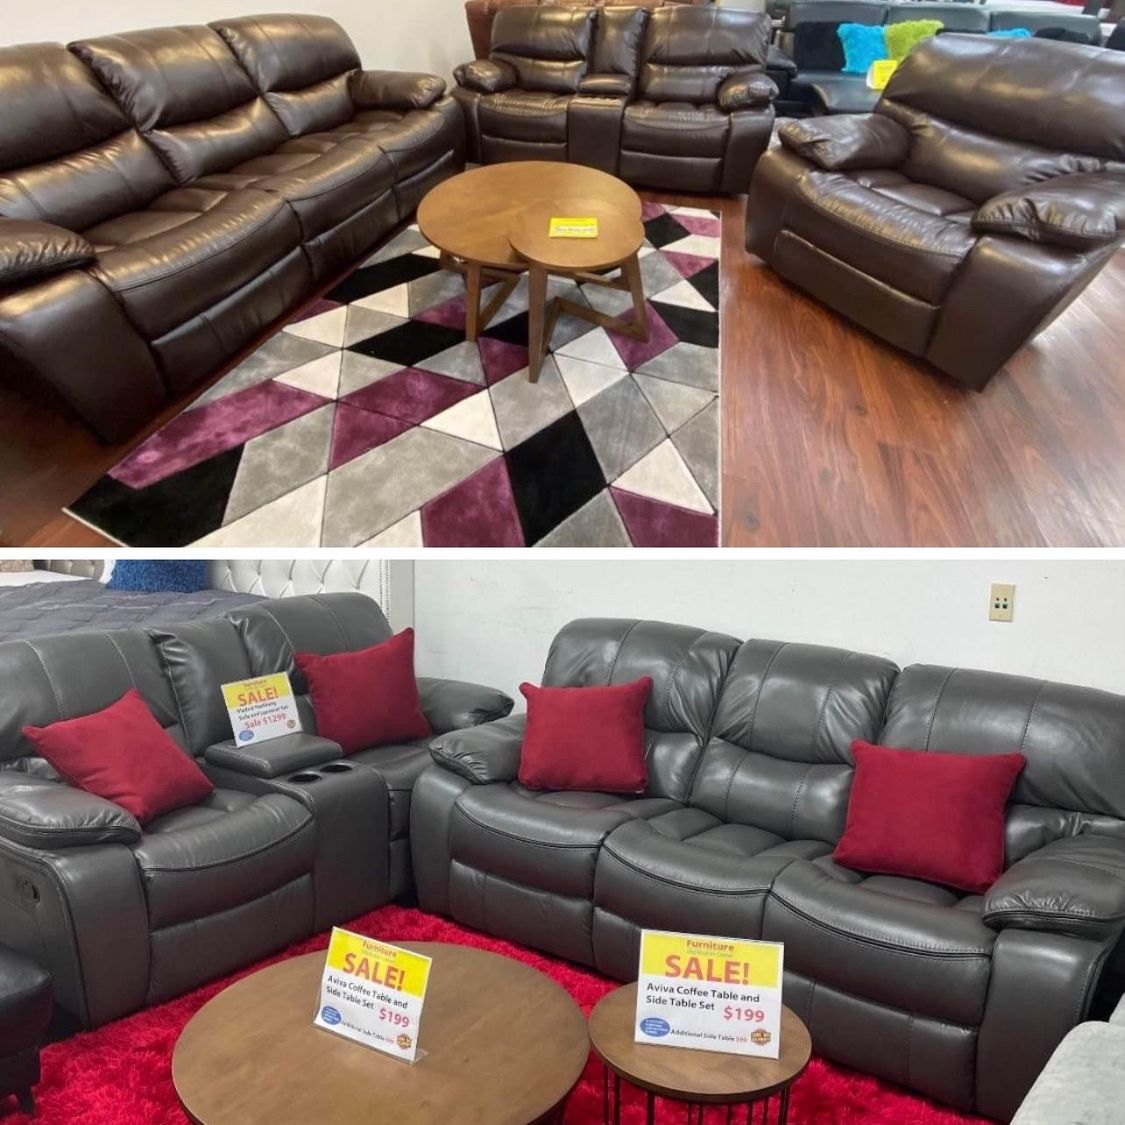 Spring Sale Event! Madrid, Leather Reclining Sofa And Loveseat Set Only $899. Easy Easy Finance Option. Same-Day Delivery.